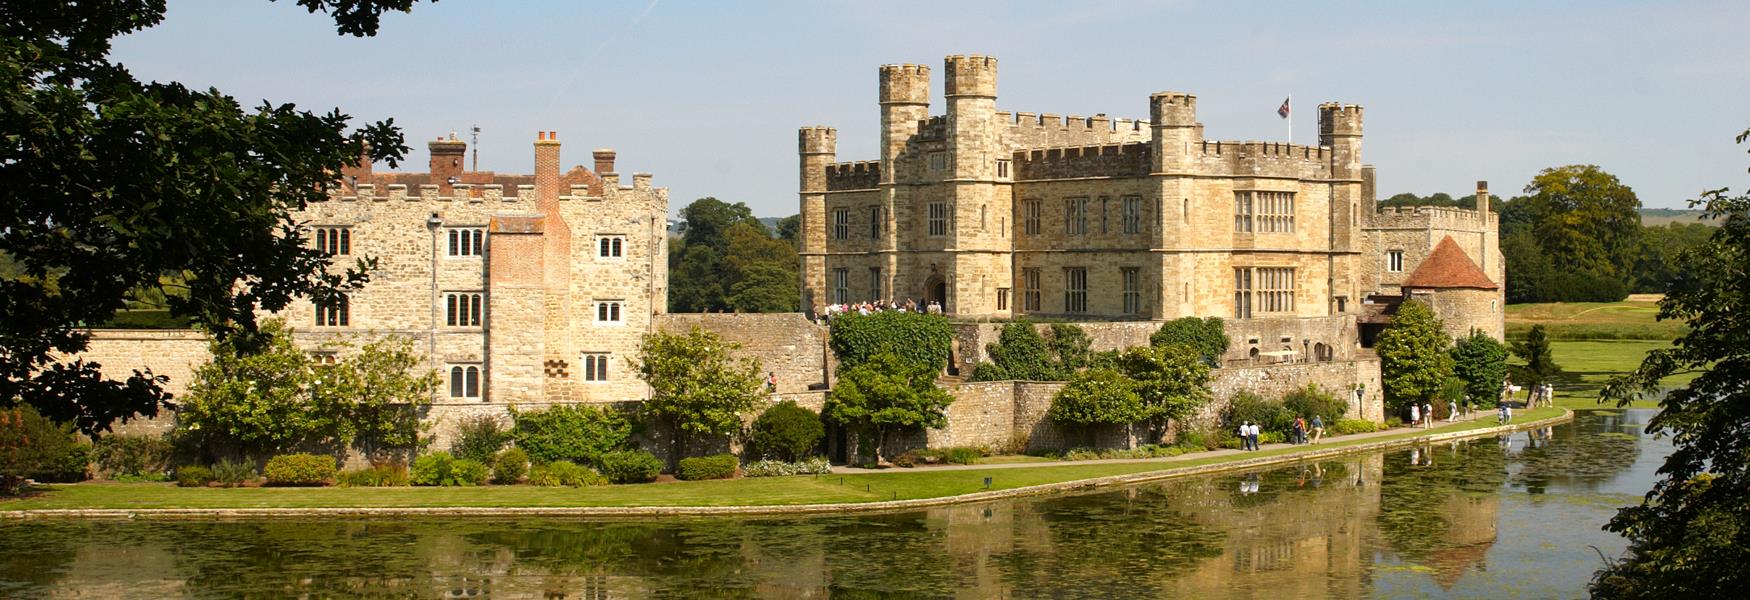 Leeds Castle -  a wonderful day out